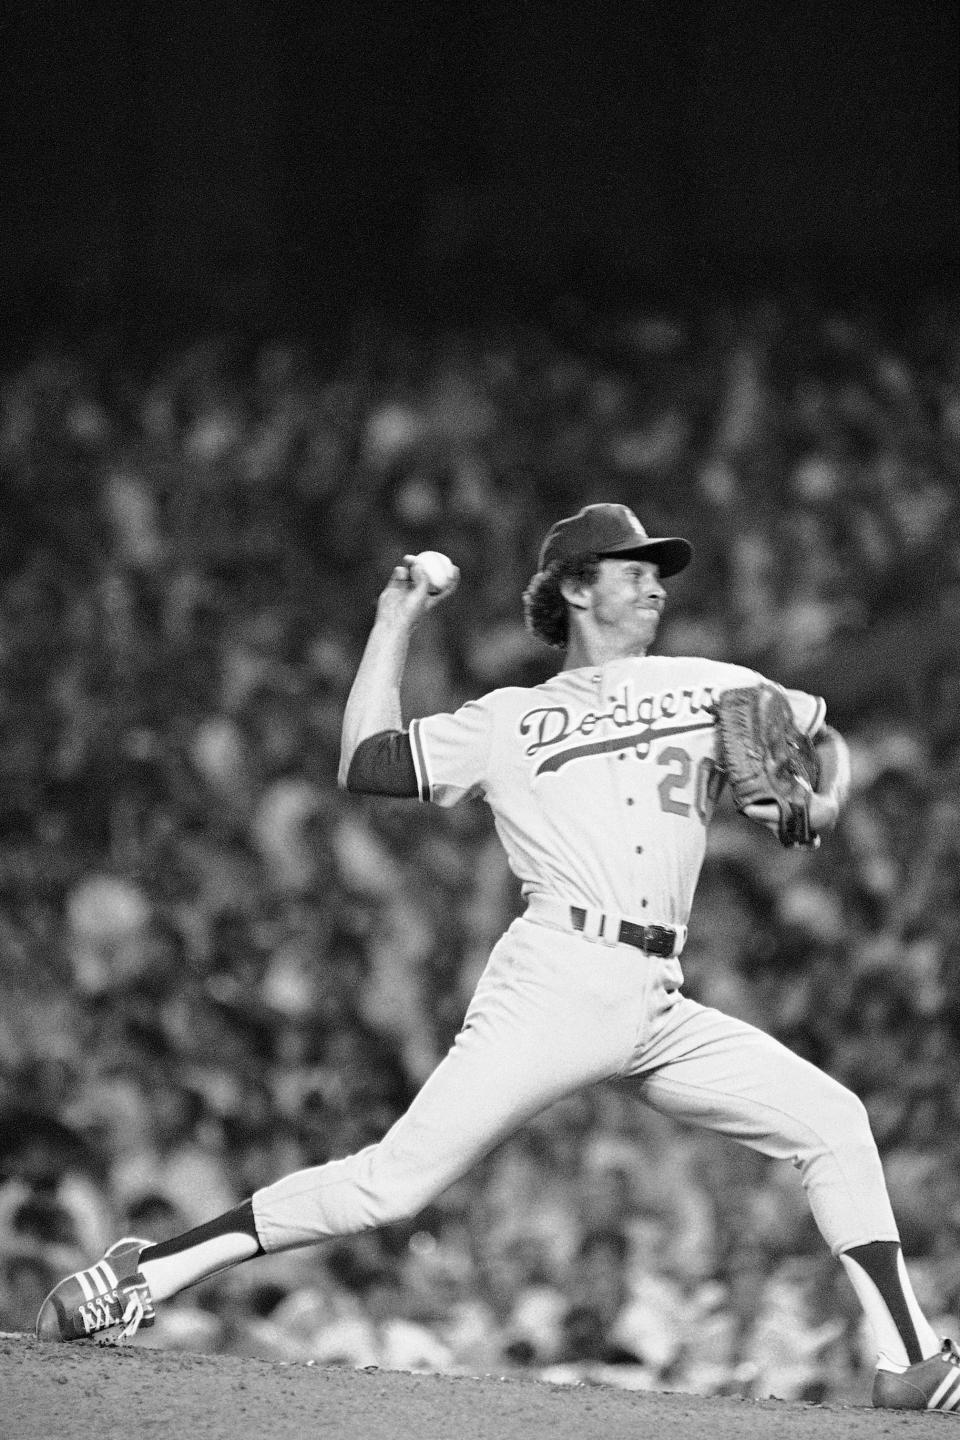 File-This July 20, 1977, file photo shows American League pitcher Don Sutton of the Los Angeles Dodgers in the 48th All-Star Game in New York Sutton, a Hall of Fame pitcher who was a stalwart of the Los Angeles Dodgers' rotation spanning an era from Sandy Koufax to Fernando Valenzuela, died Tuesday, Jan. 19, 2021. He was 75. The Baseball Hall of Fame in Cooperstown, New York, said Sutton died at his home in Rancho Mirage, California, after a long struggle with cancer. The Atlanta Braves, where Sutton was a long-time broadcaster, said he died in his sleep. (AP Photo, File) (AP Photo, File)